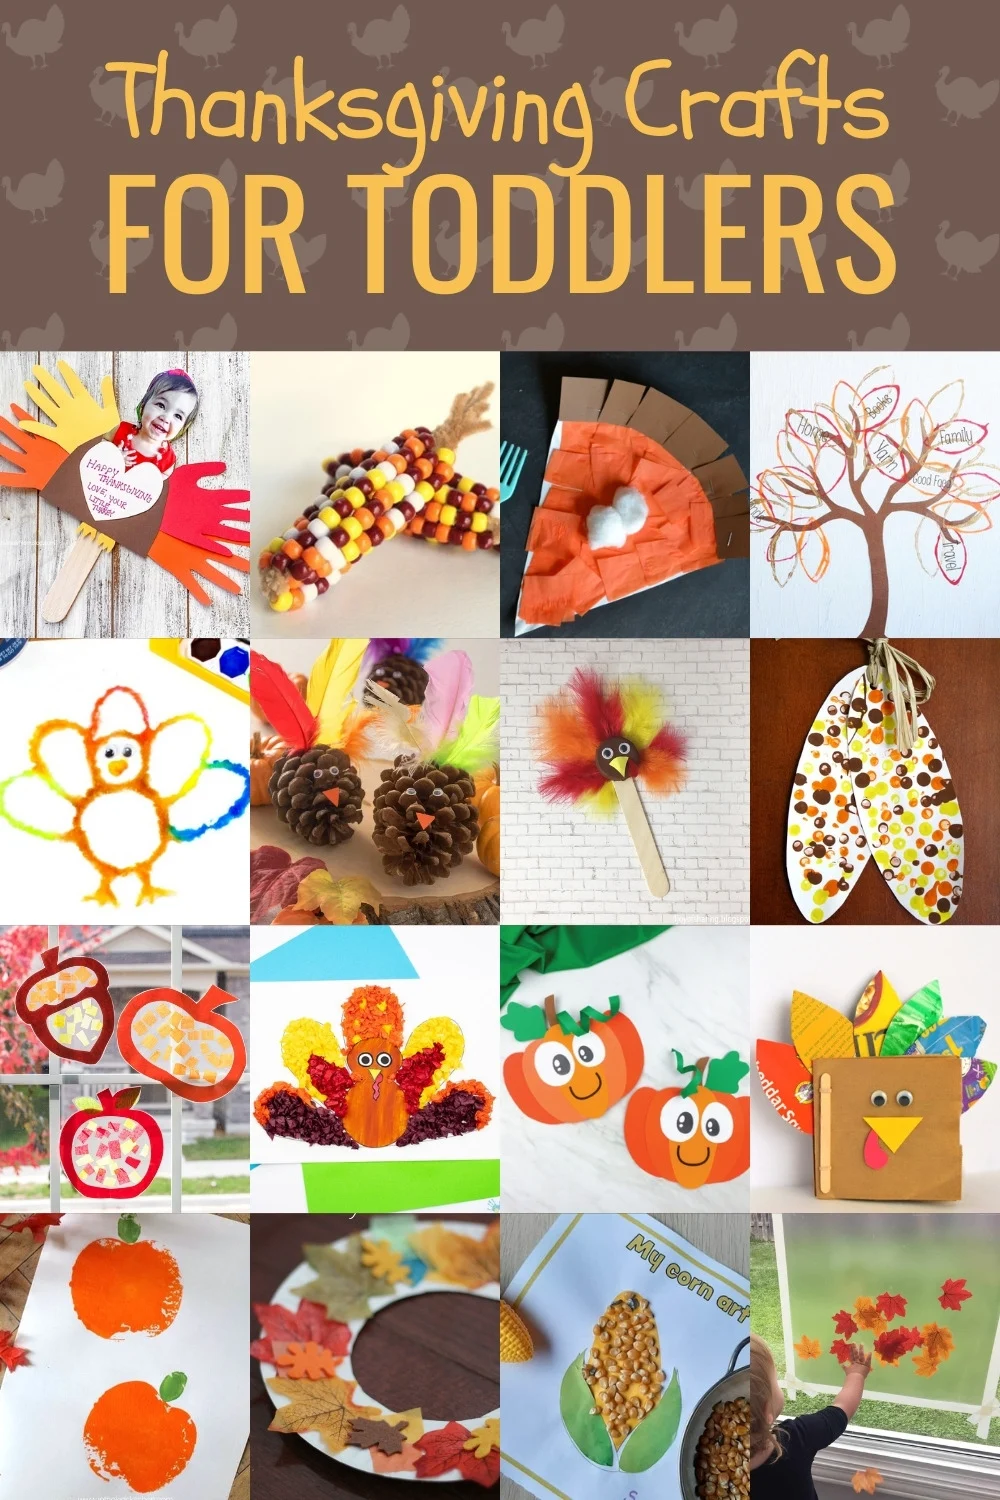 Thanksgiving Crafts for Toddlers: The Ultimate List - DIY Candy